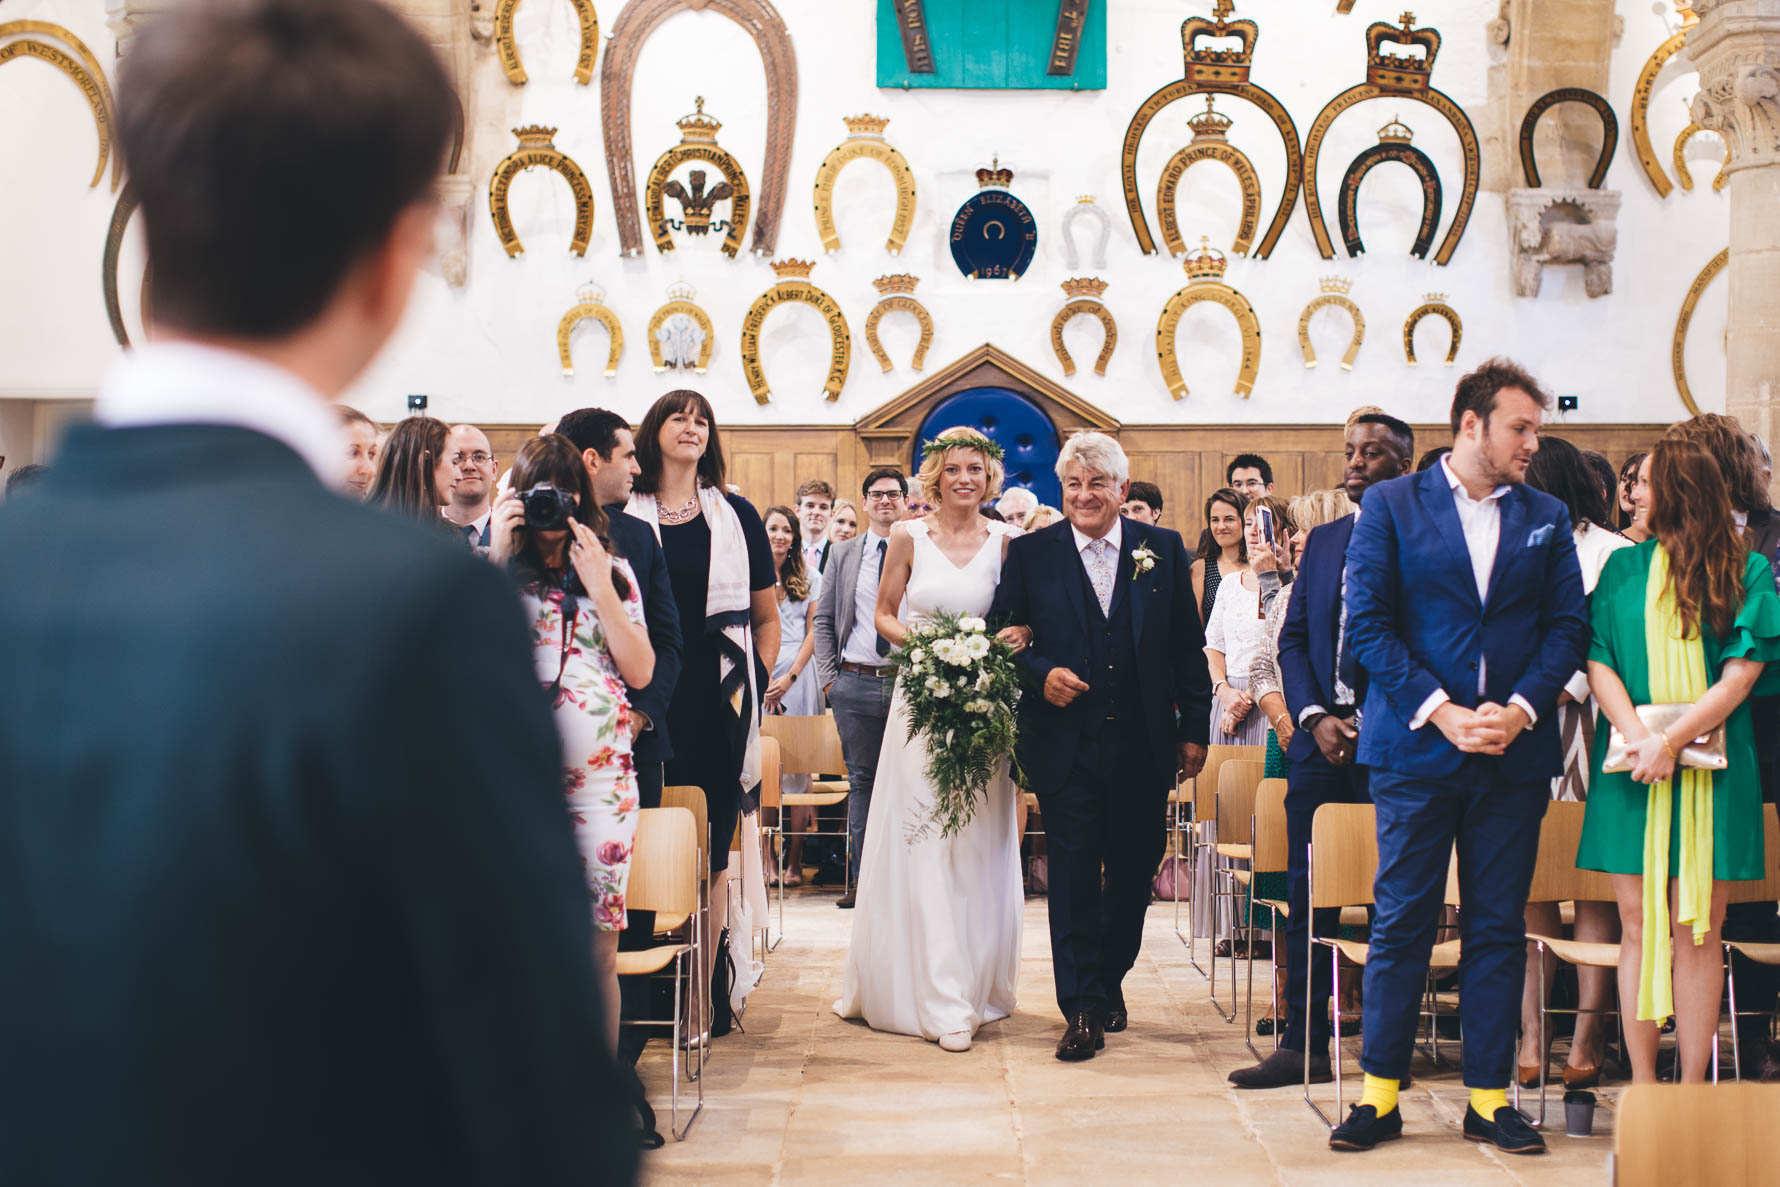 Bride being walked down the aisle by her father at the Great Hall at Oakham Castle. There are large ornamnetal horse shoes decorating the wall